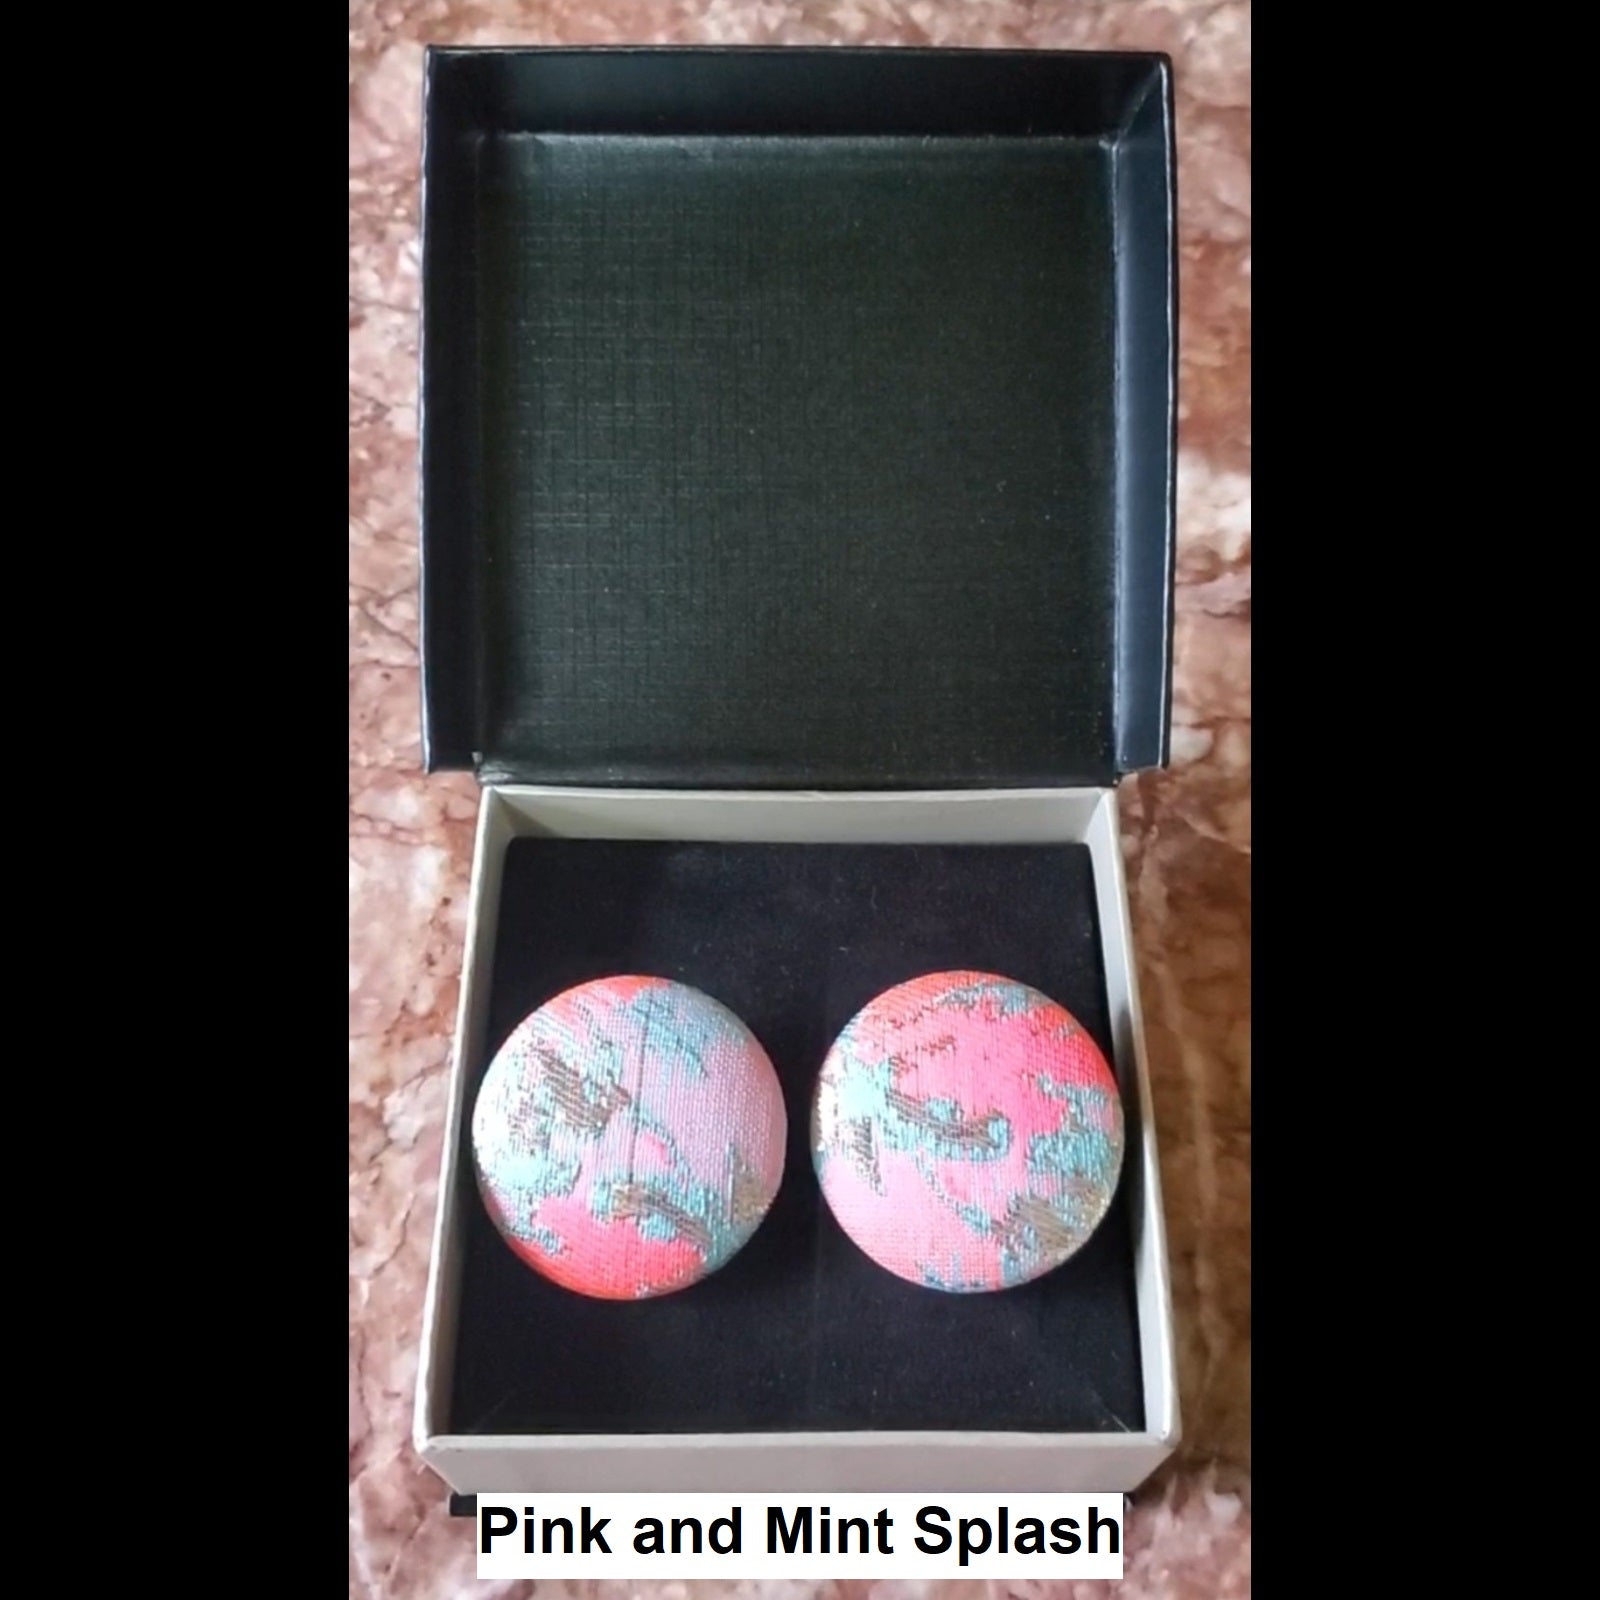 Pink and mint splash print button earrings in jewelry box